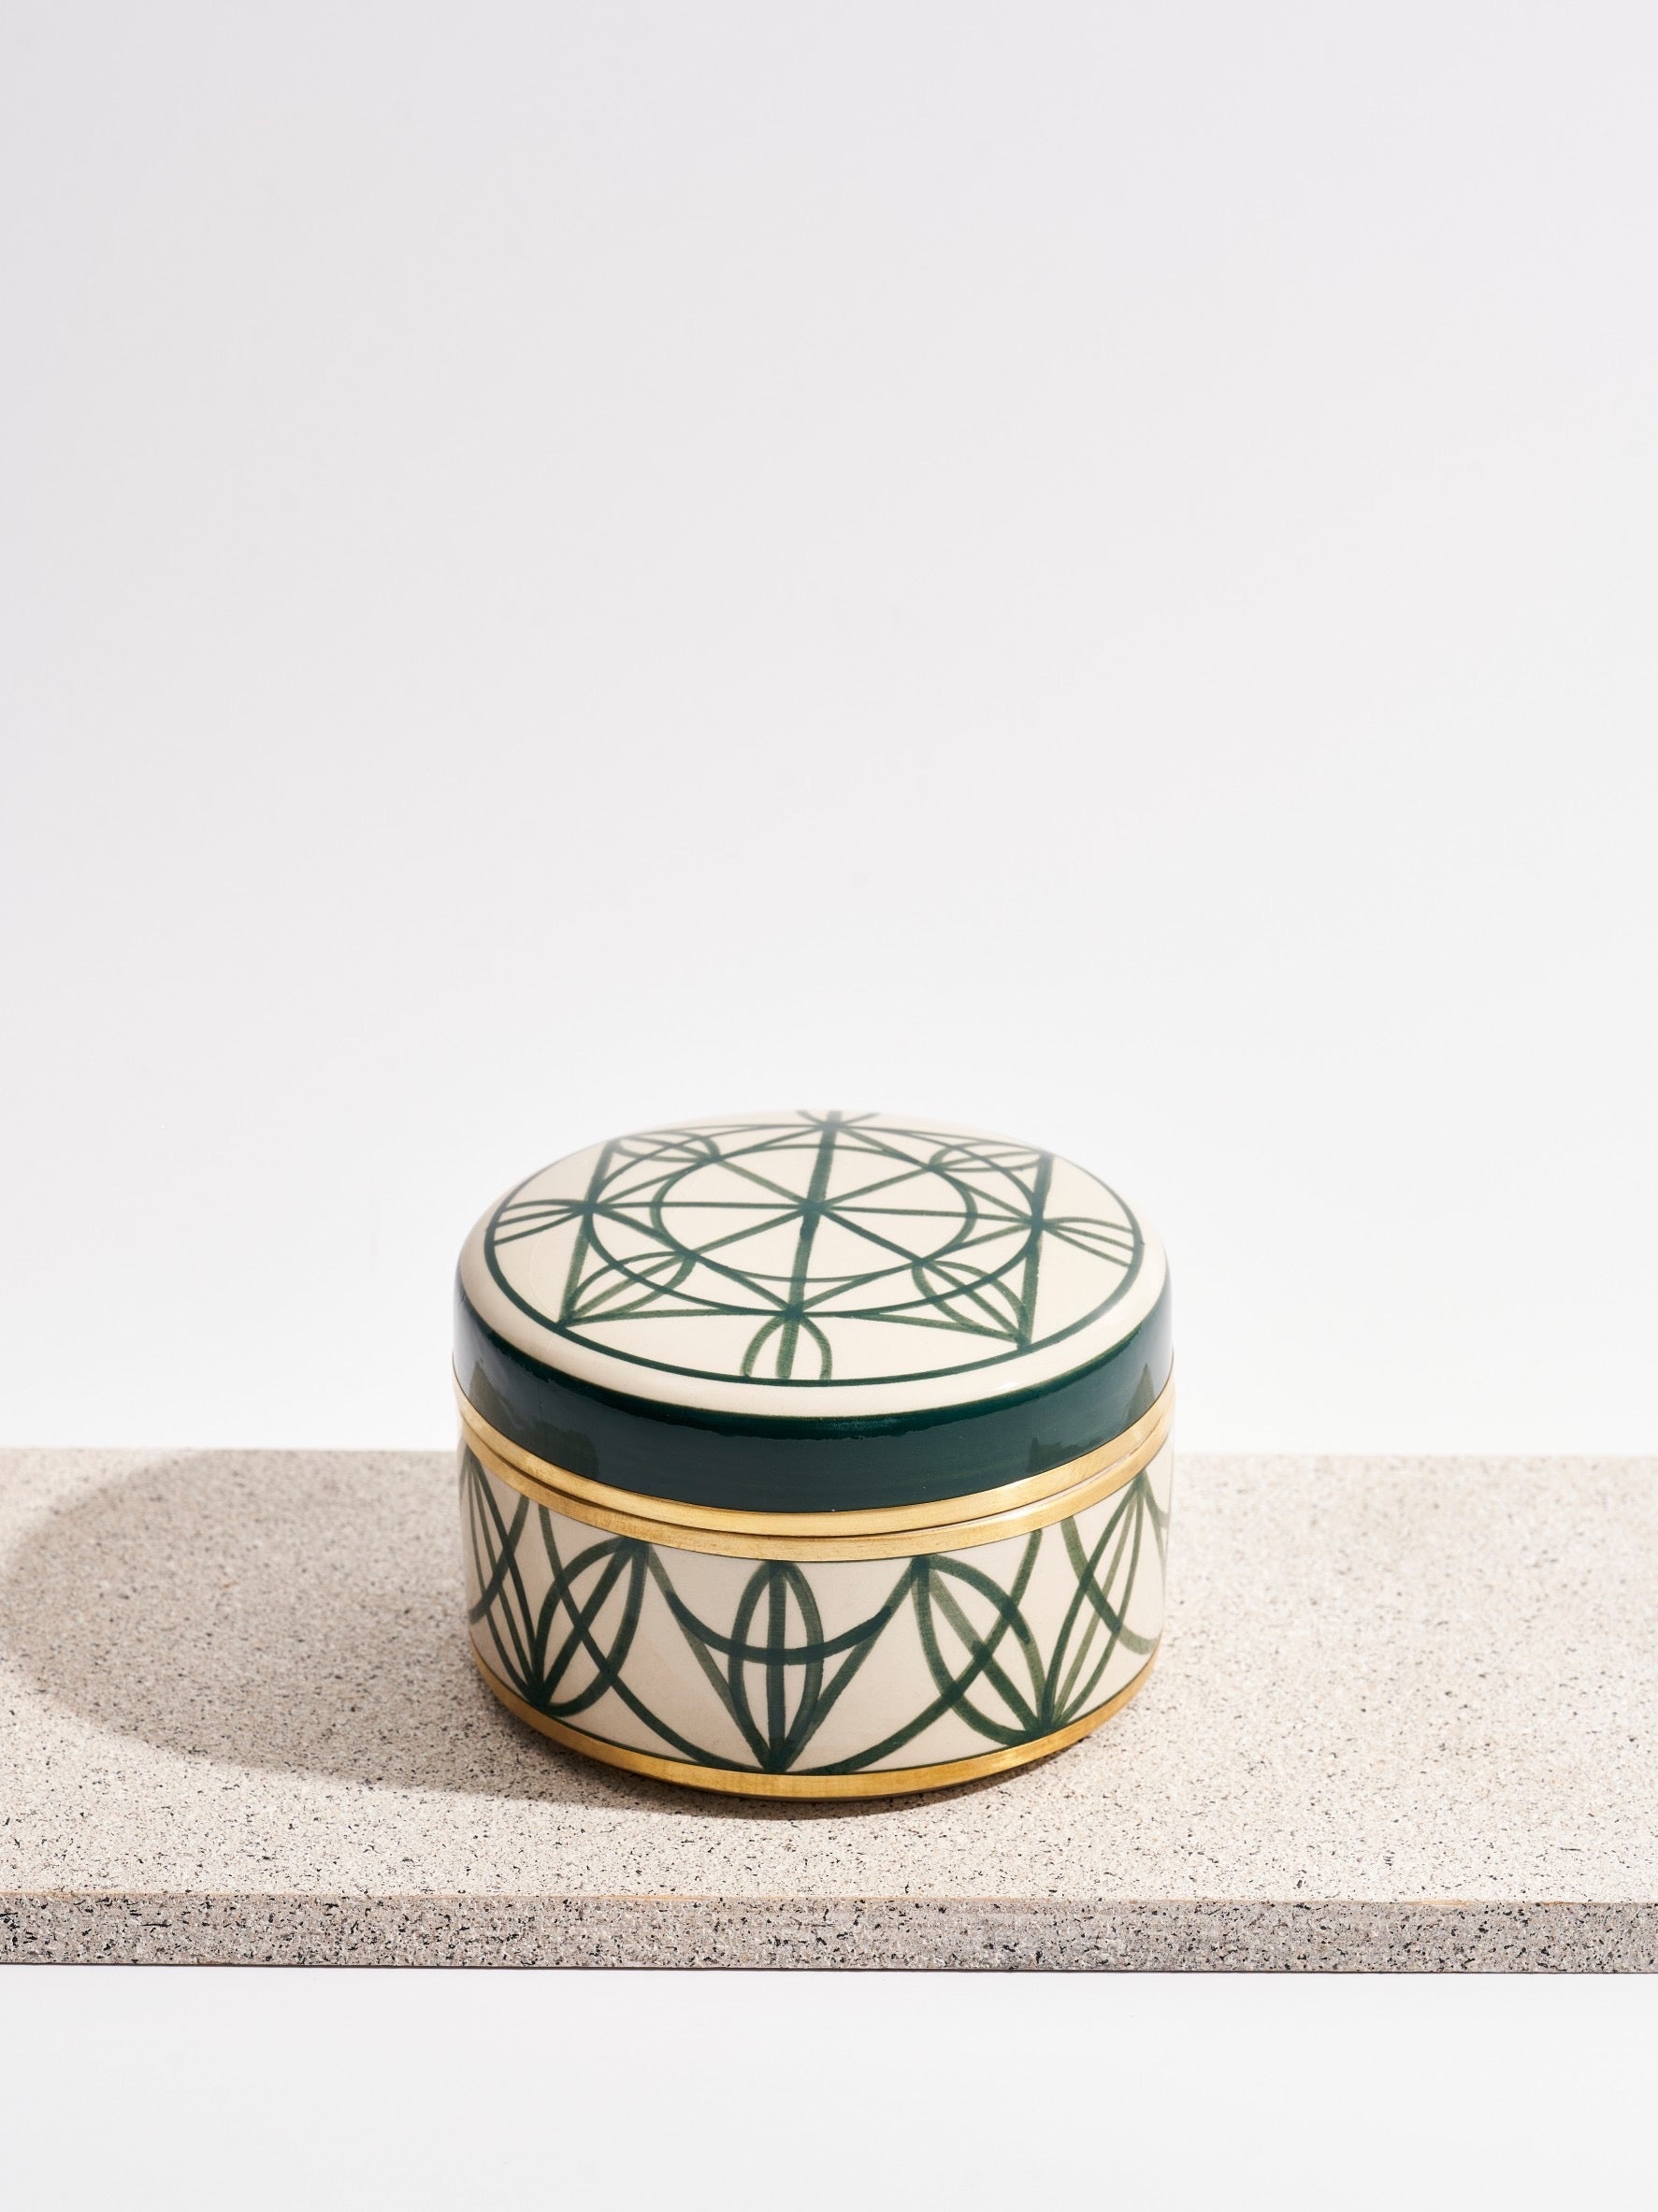 Thai Chamanard Natural Soy Wax Candle in Hand-painted Ceramic Container